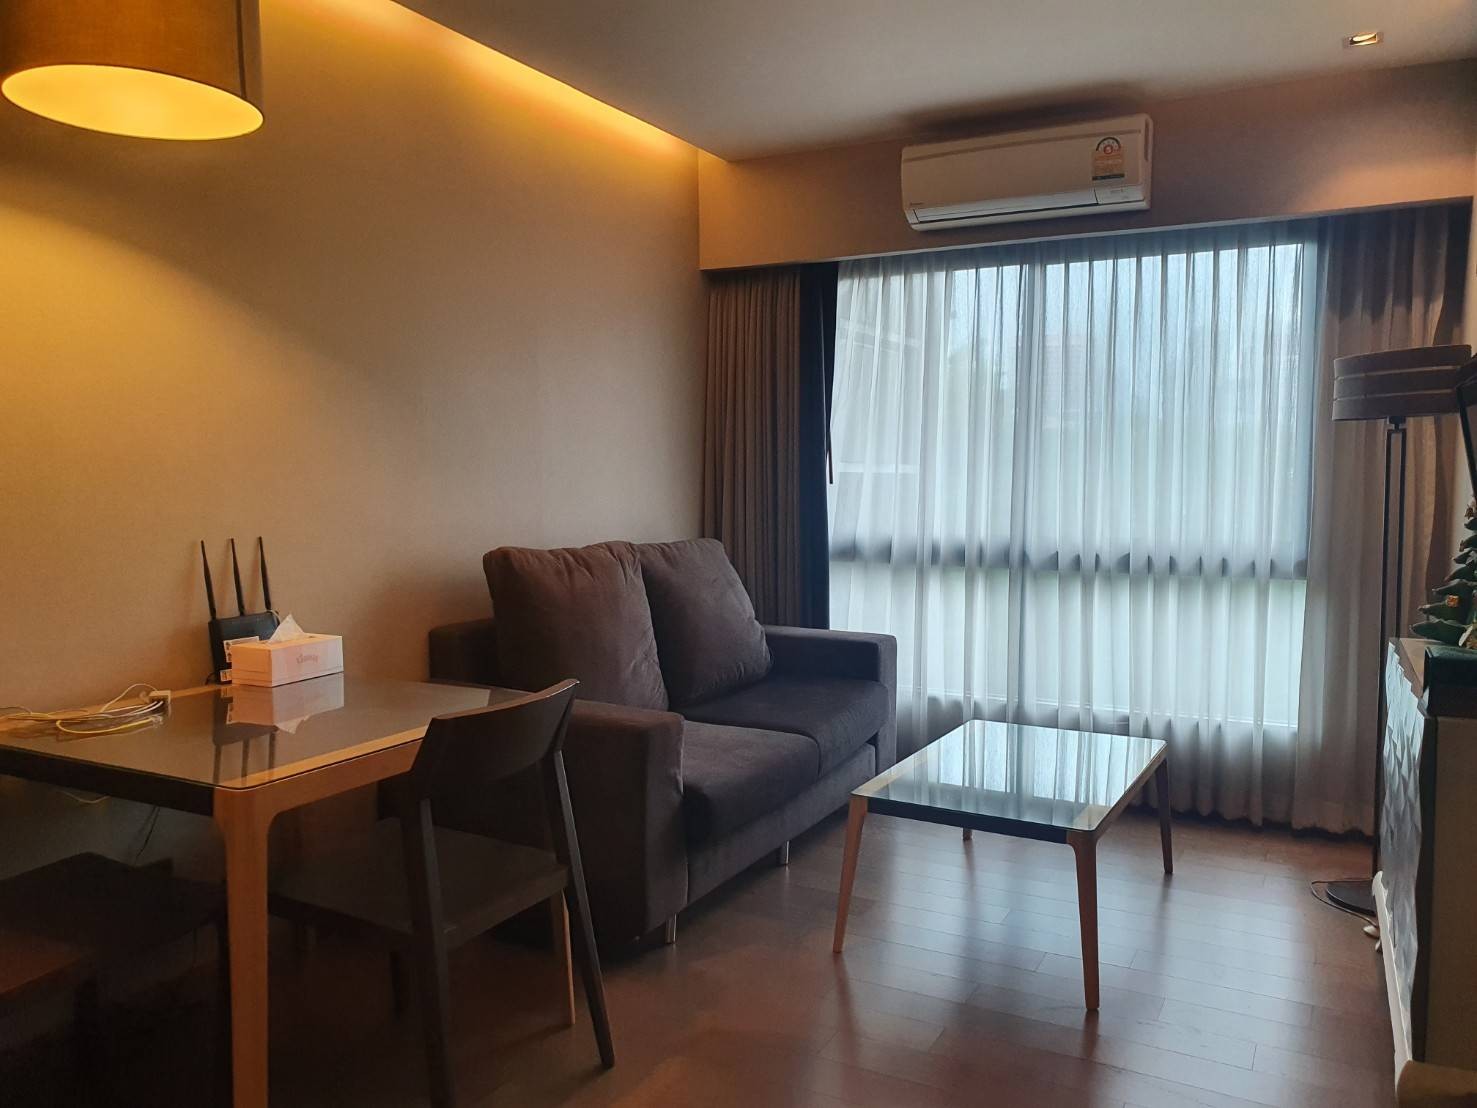 Room for Rent Tidy Thonglor condo 42Smq 1 Bedroom Heart of Thonglor 16K per Month 